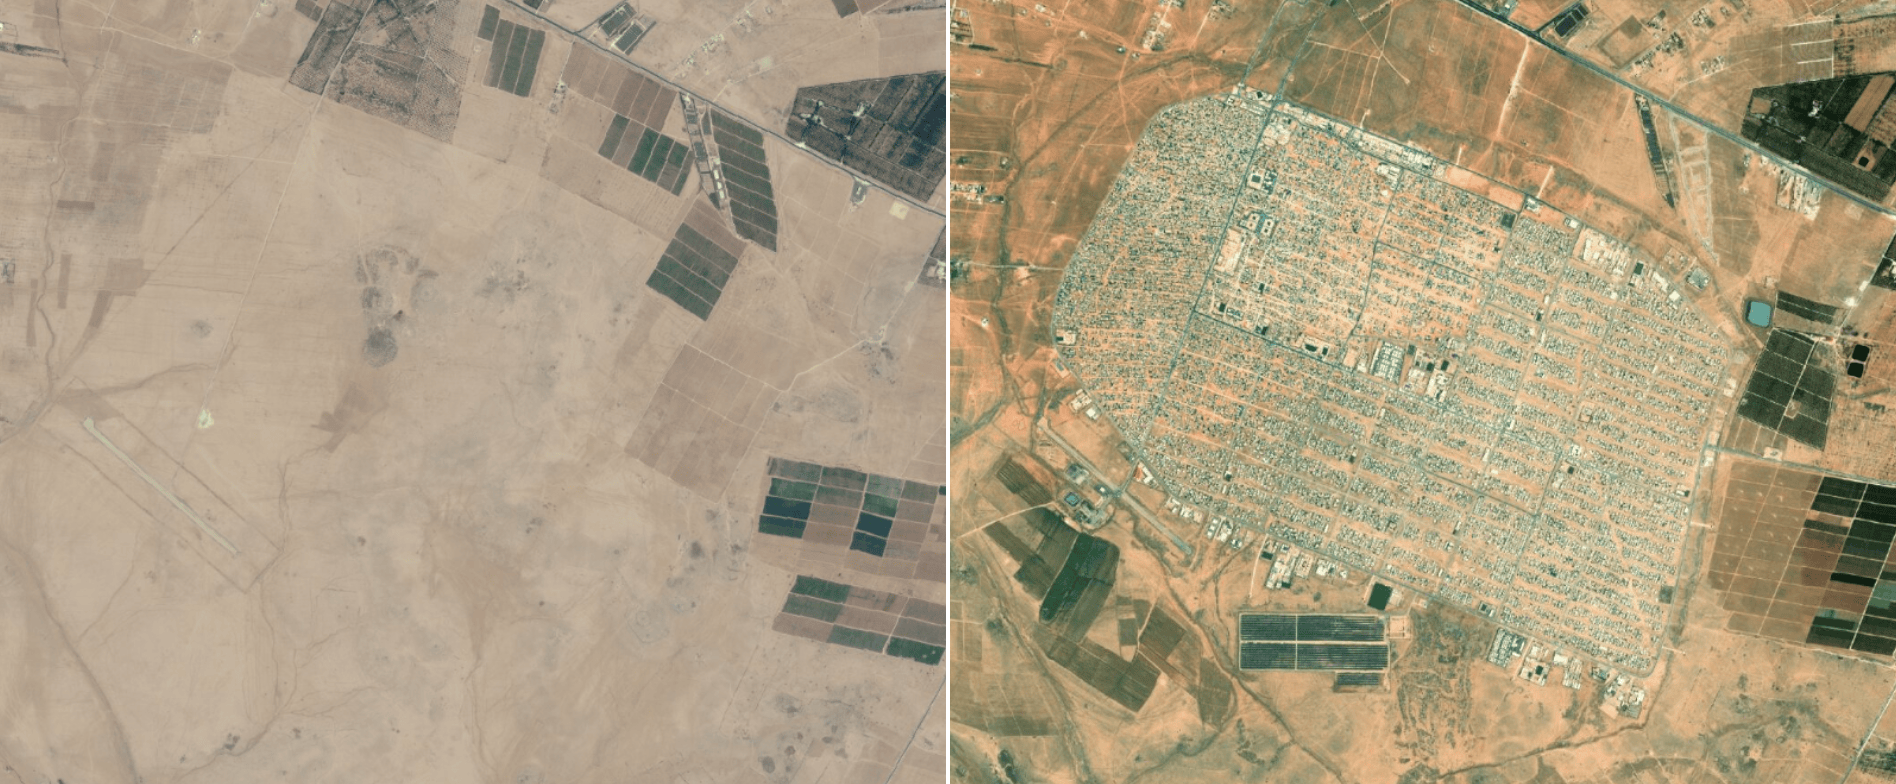 A side-by-side satellite imagery comparison of the Jordanian desert in 2014 (left) and 2022 (right). In 2014, the land is largely barren, but in 2022, a massive refugee camp dominates this area.